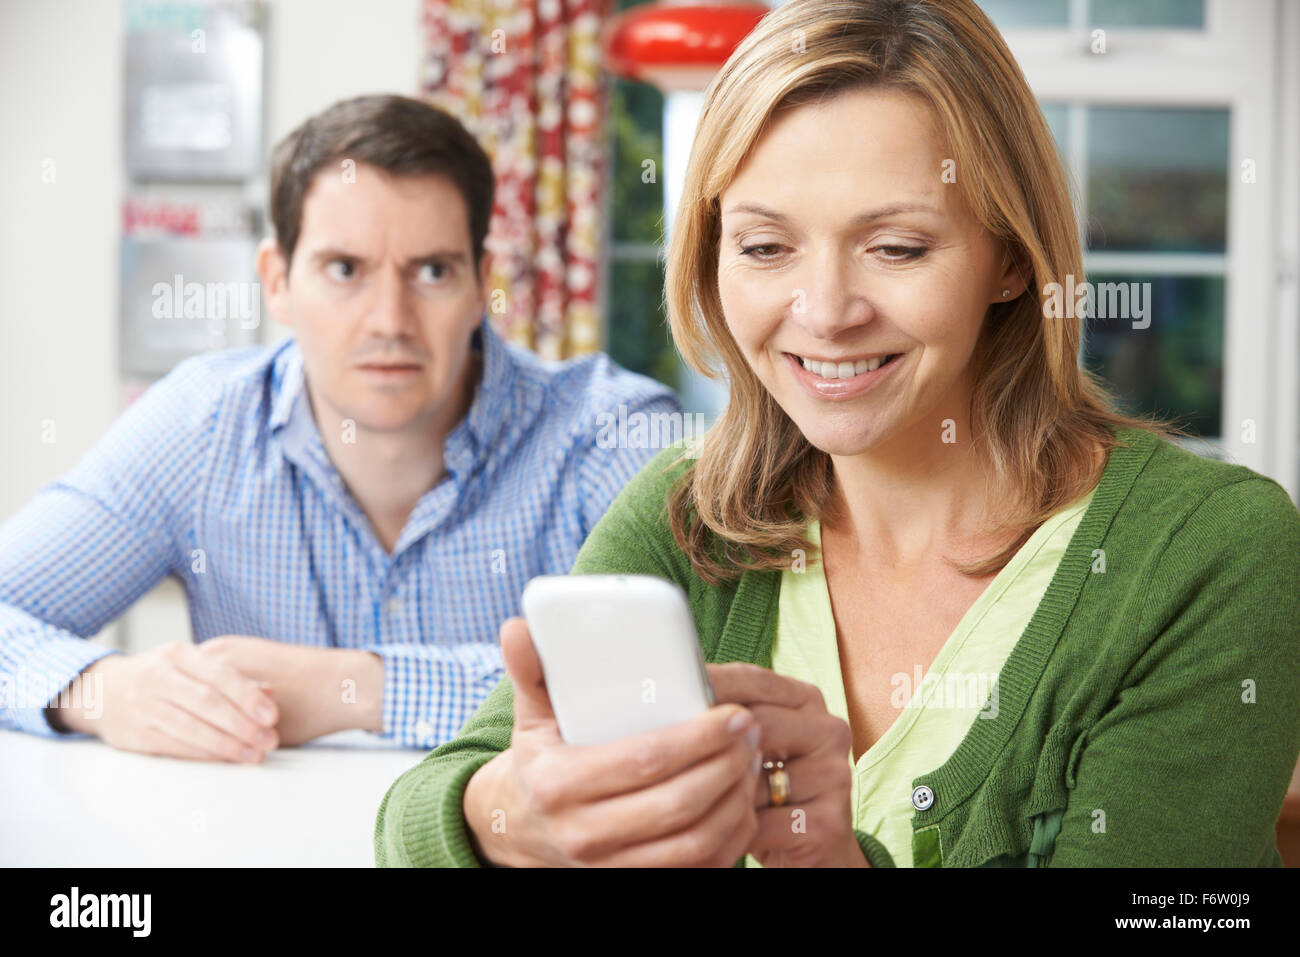 Unhappy Man Sitting At Table As Partner Texts On Mobile Phone Stock Photo